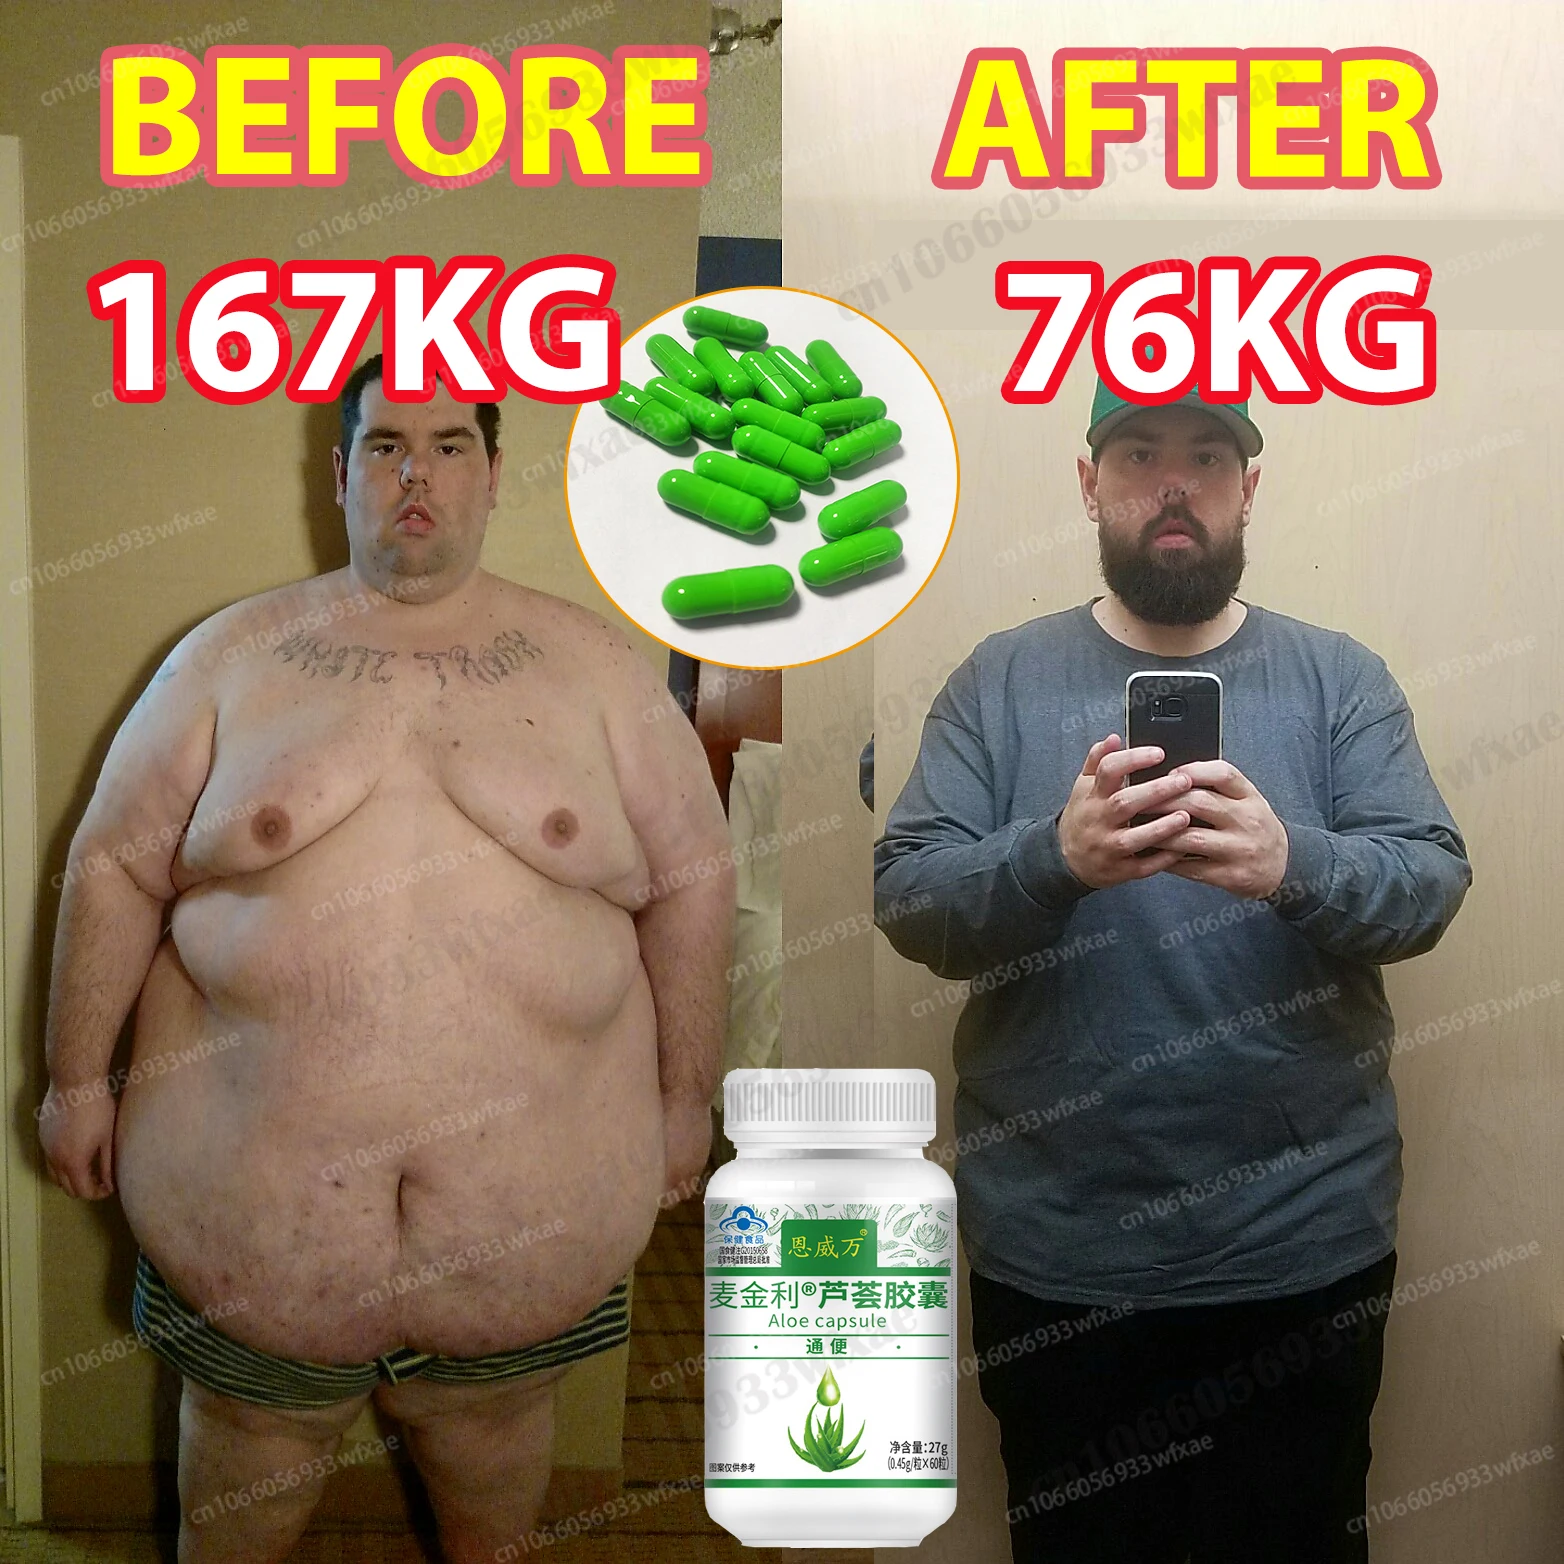 

60 Weight Loss Pill Natural Aloe Lose Weight Fast Diet Pill Fat Burner Appetite Suppressant Supplement Slimming Belly Body Detox